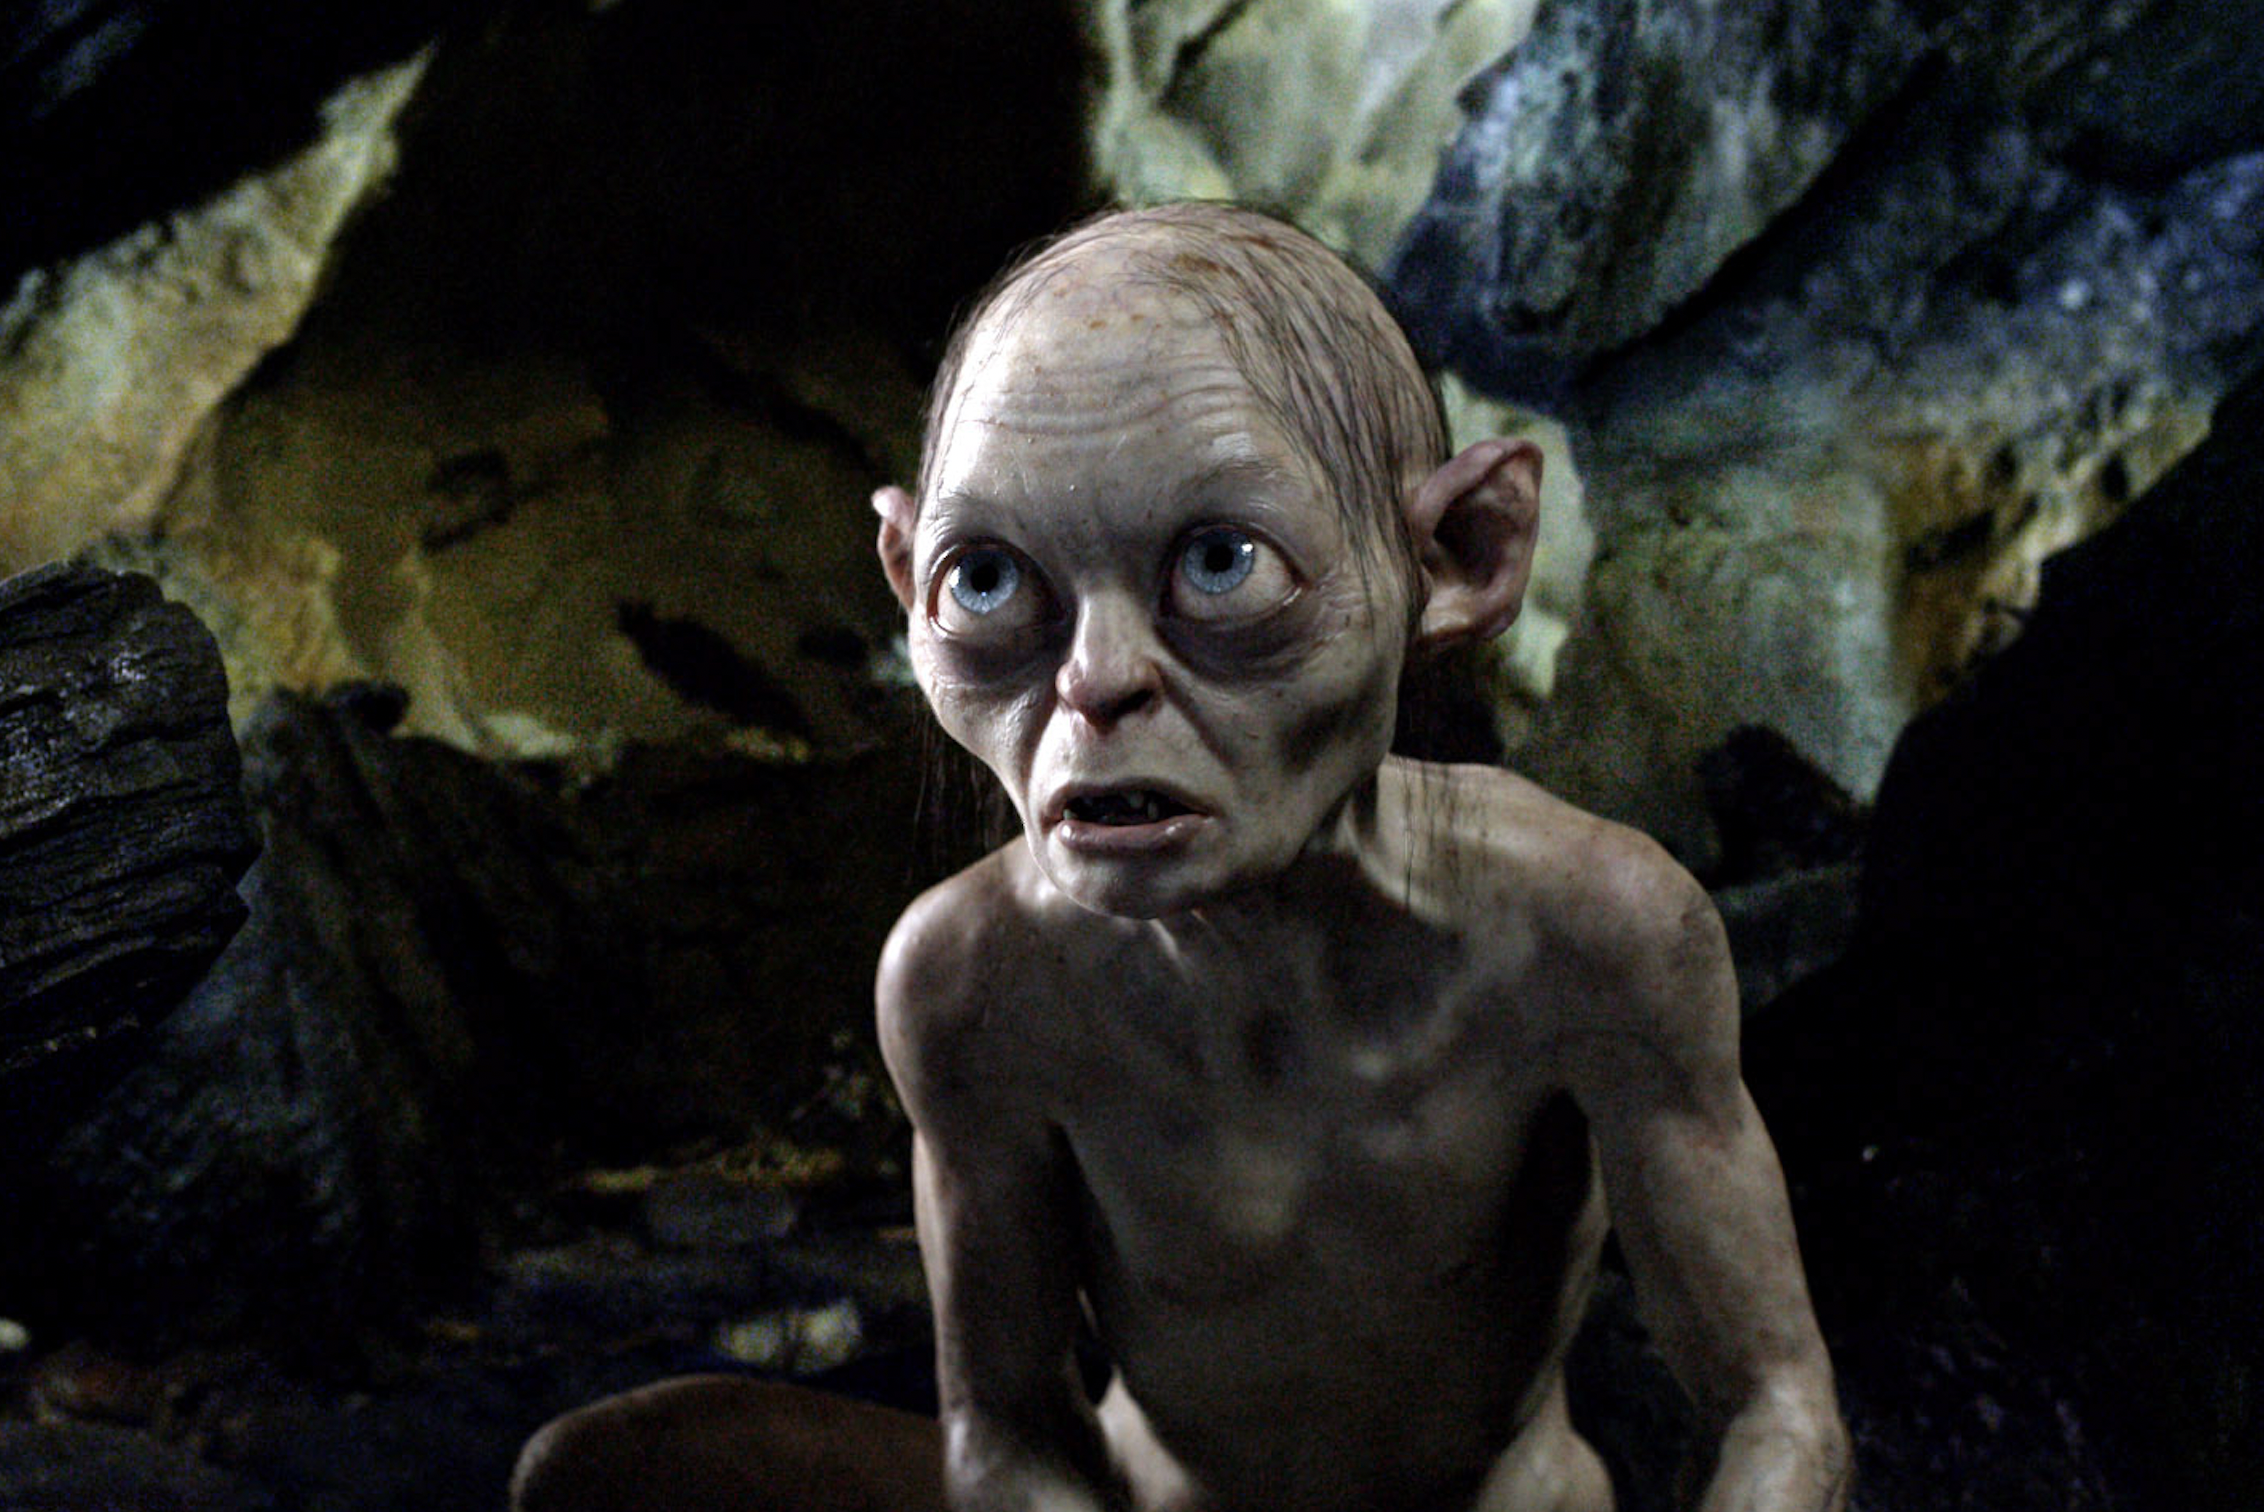 15-Year-Old ‘Hunt for Gollum’ Fan Film Restored Online After It Got Blocked Following Warner Bros.’ New ‘Lord...